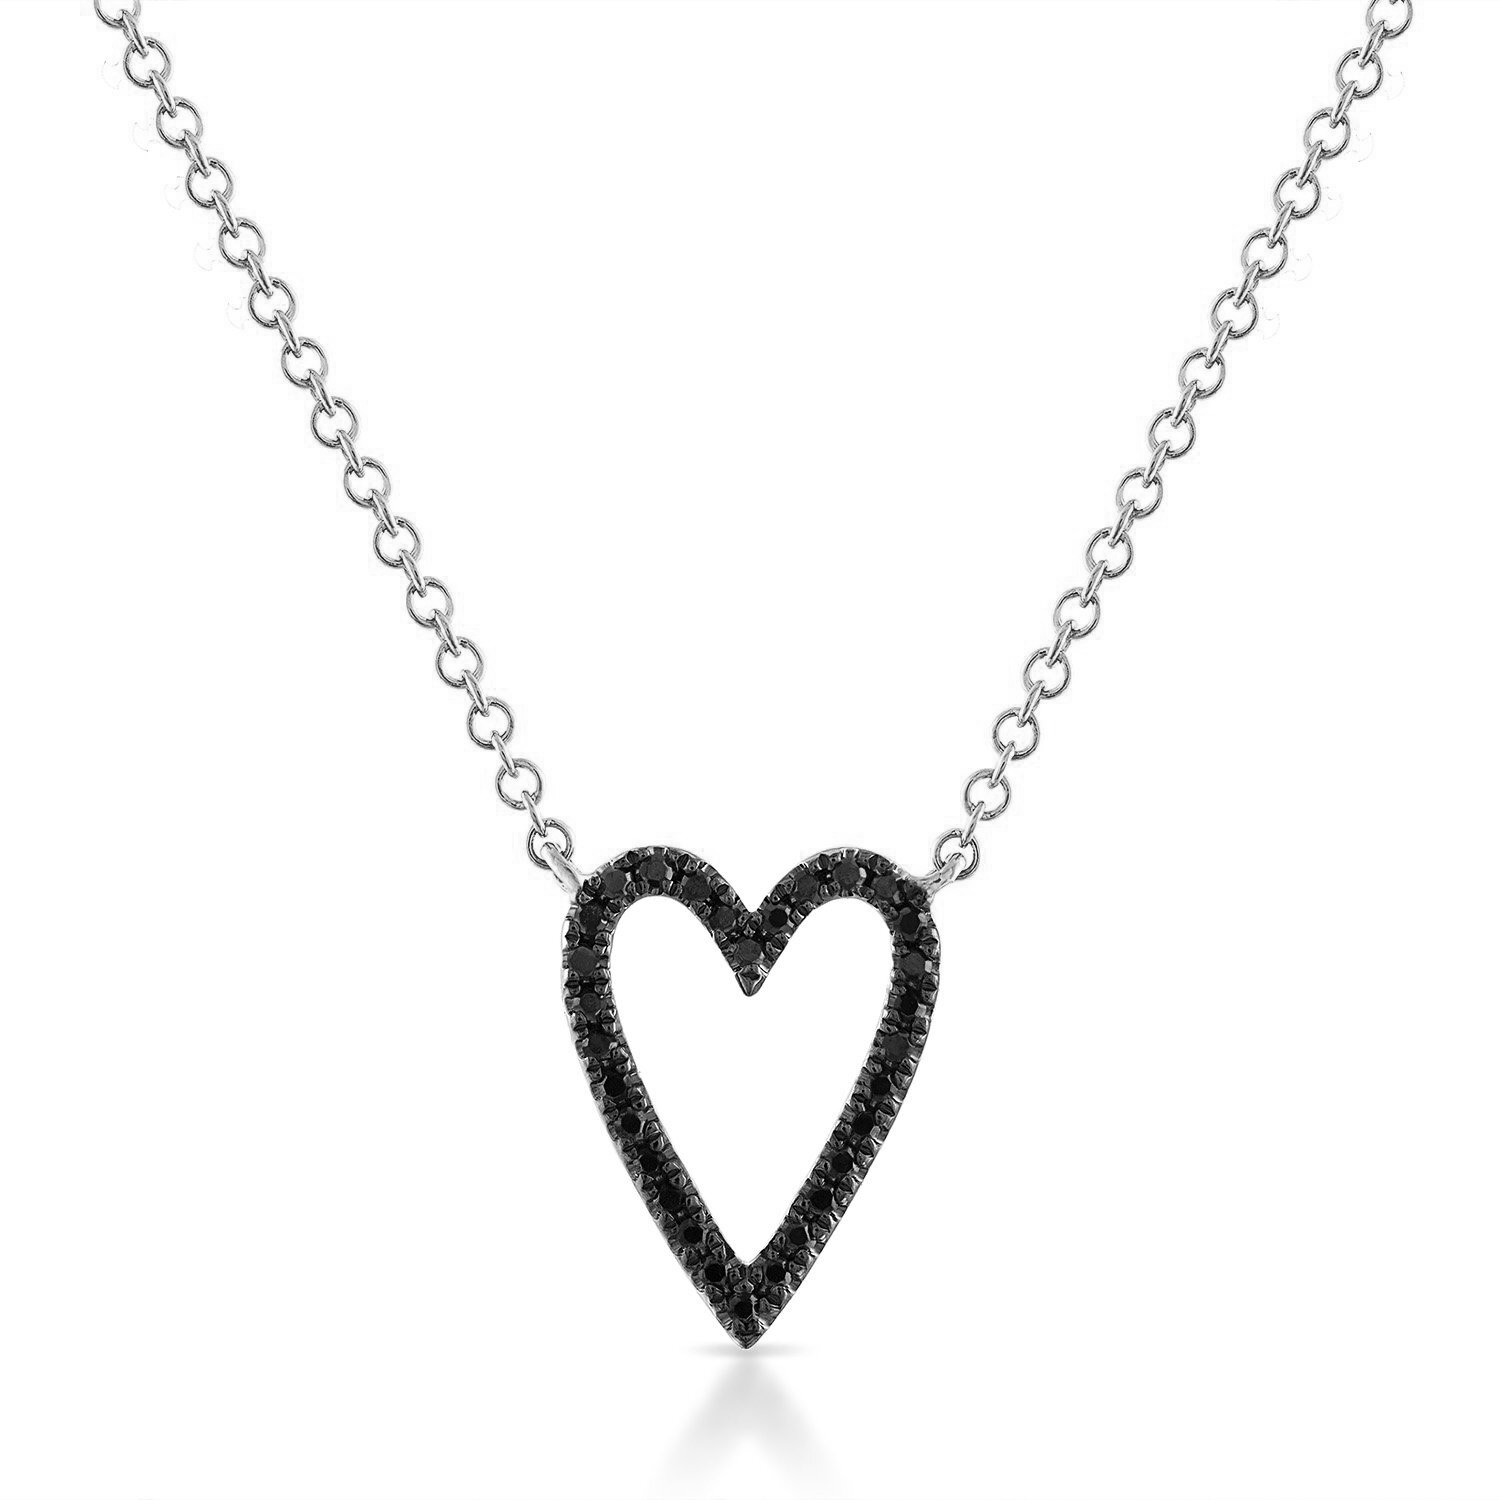 Small Black Diamond Pave Heart Shaped Outline Necklace